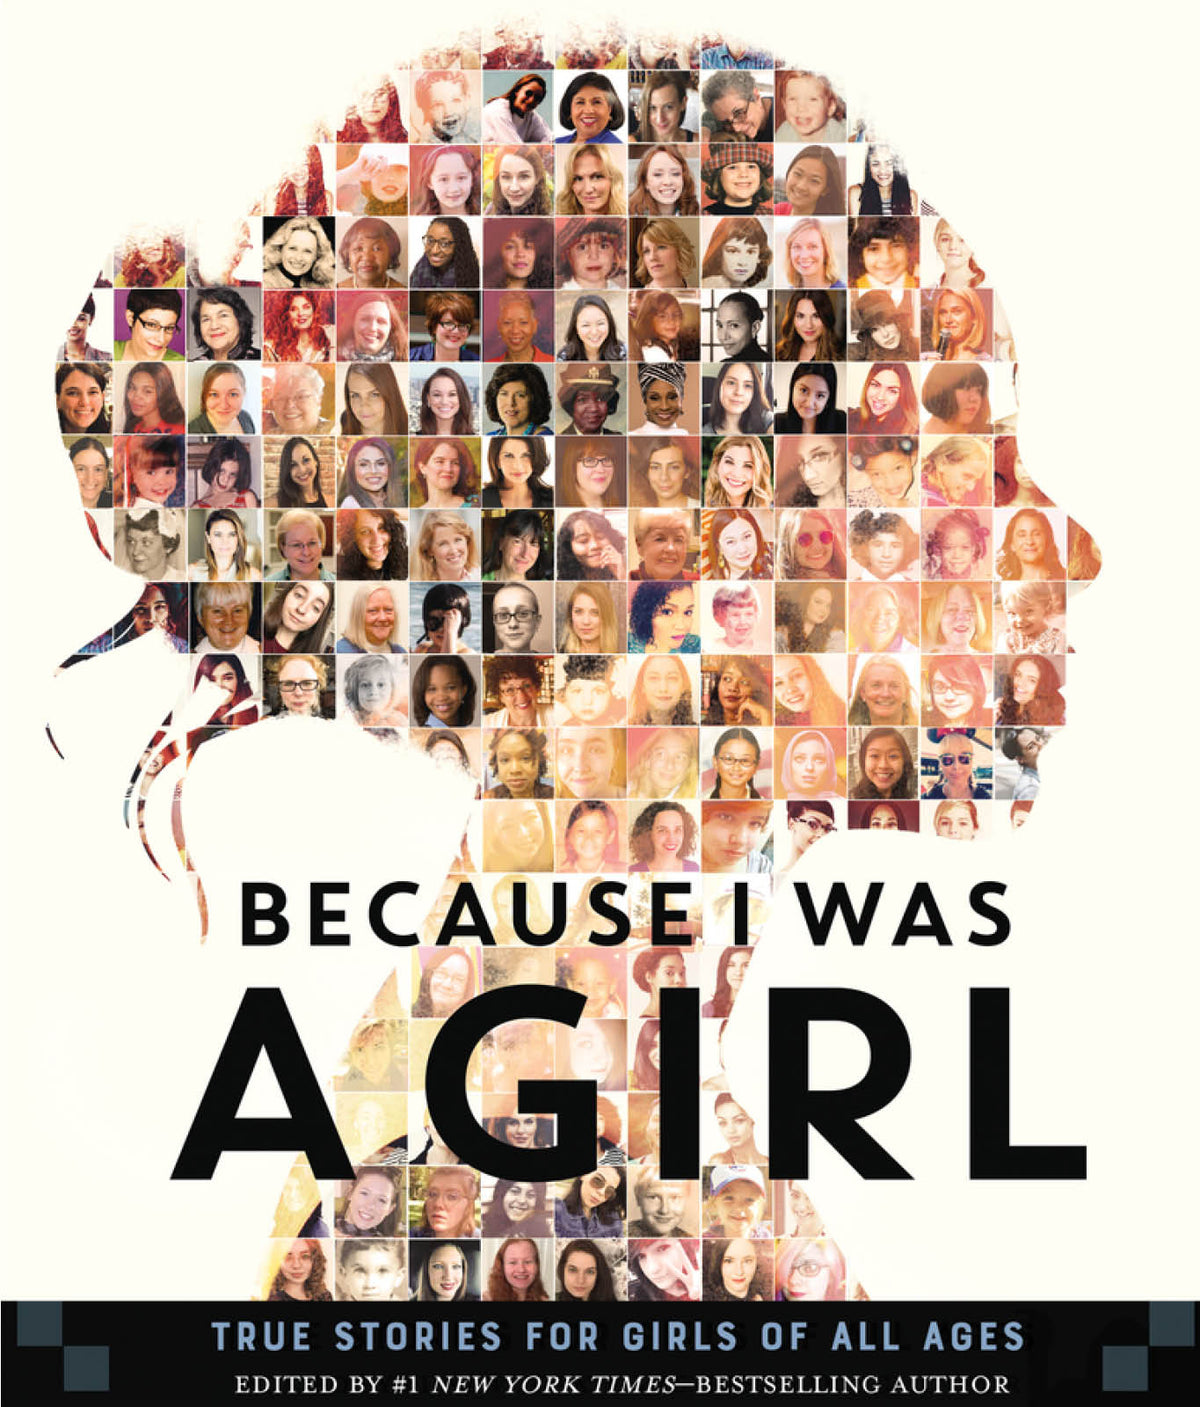 Because I Was a Girl: True Stories for Girls of All Ages by Melissa De La Cruz